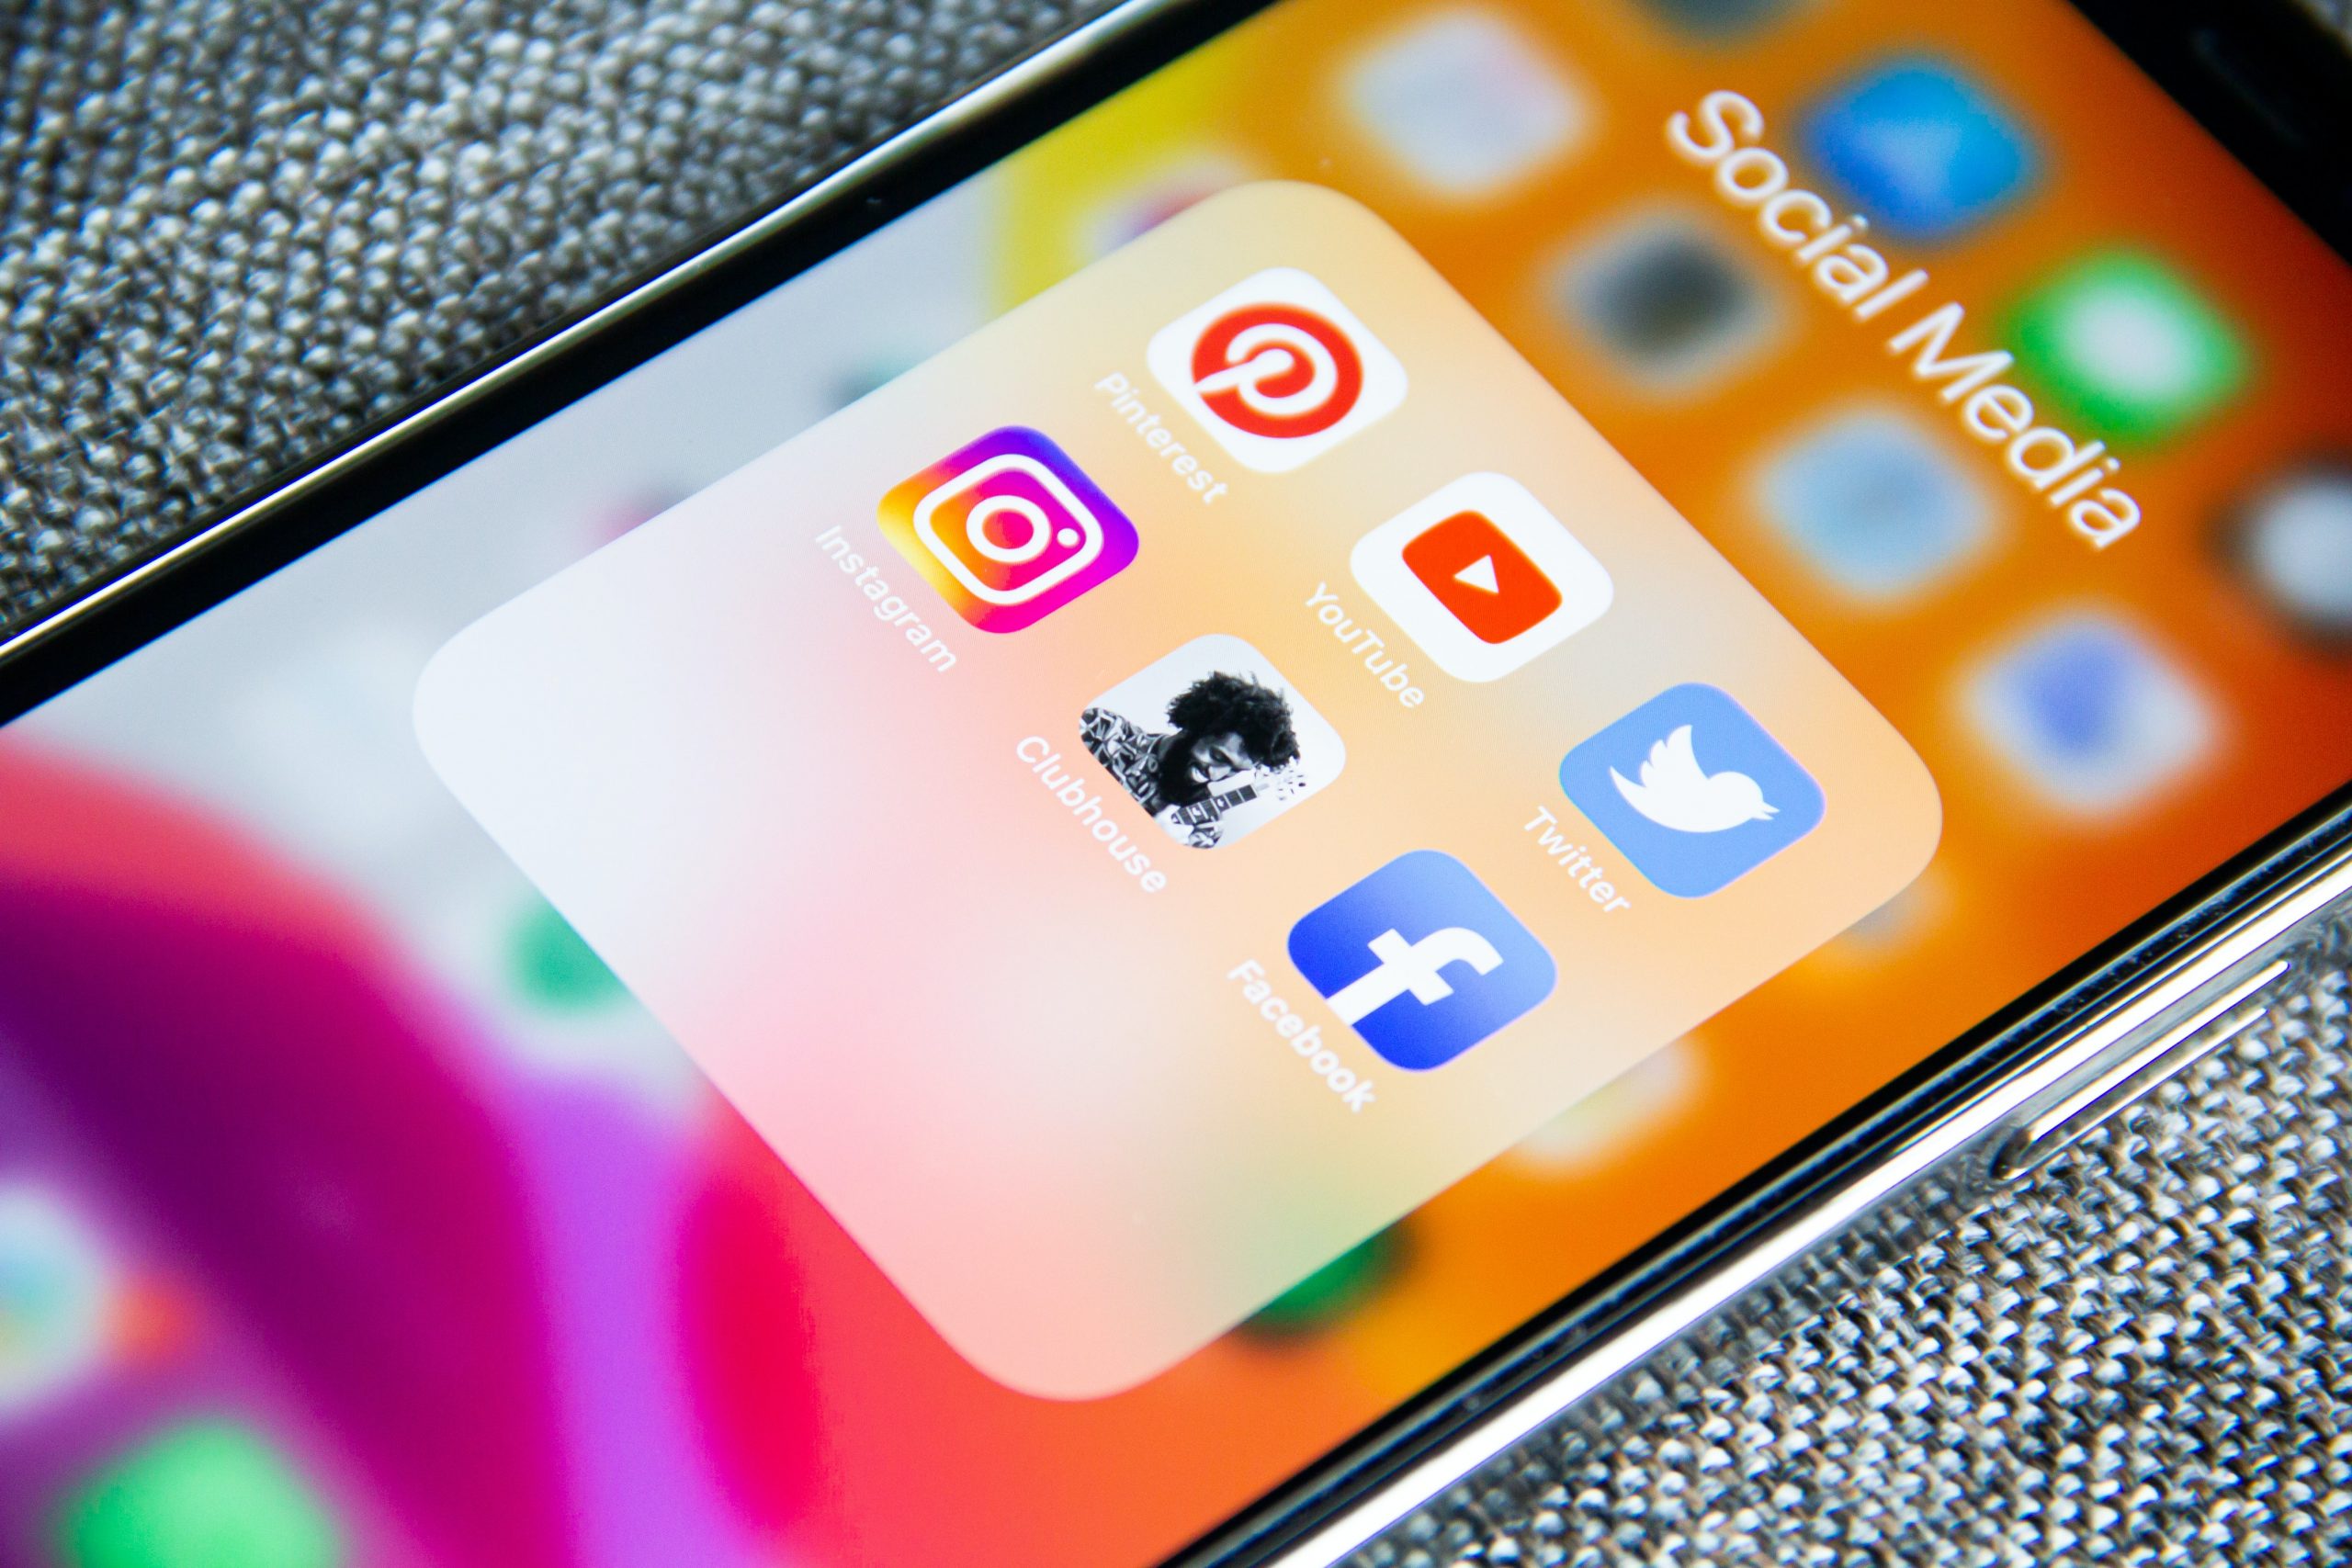 An iPhone screen with different social media app icons visible